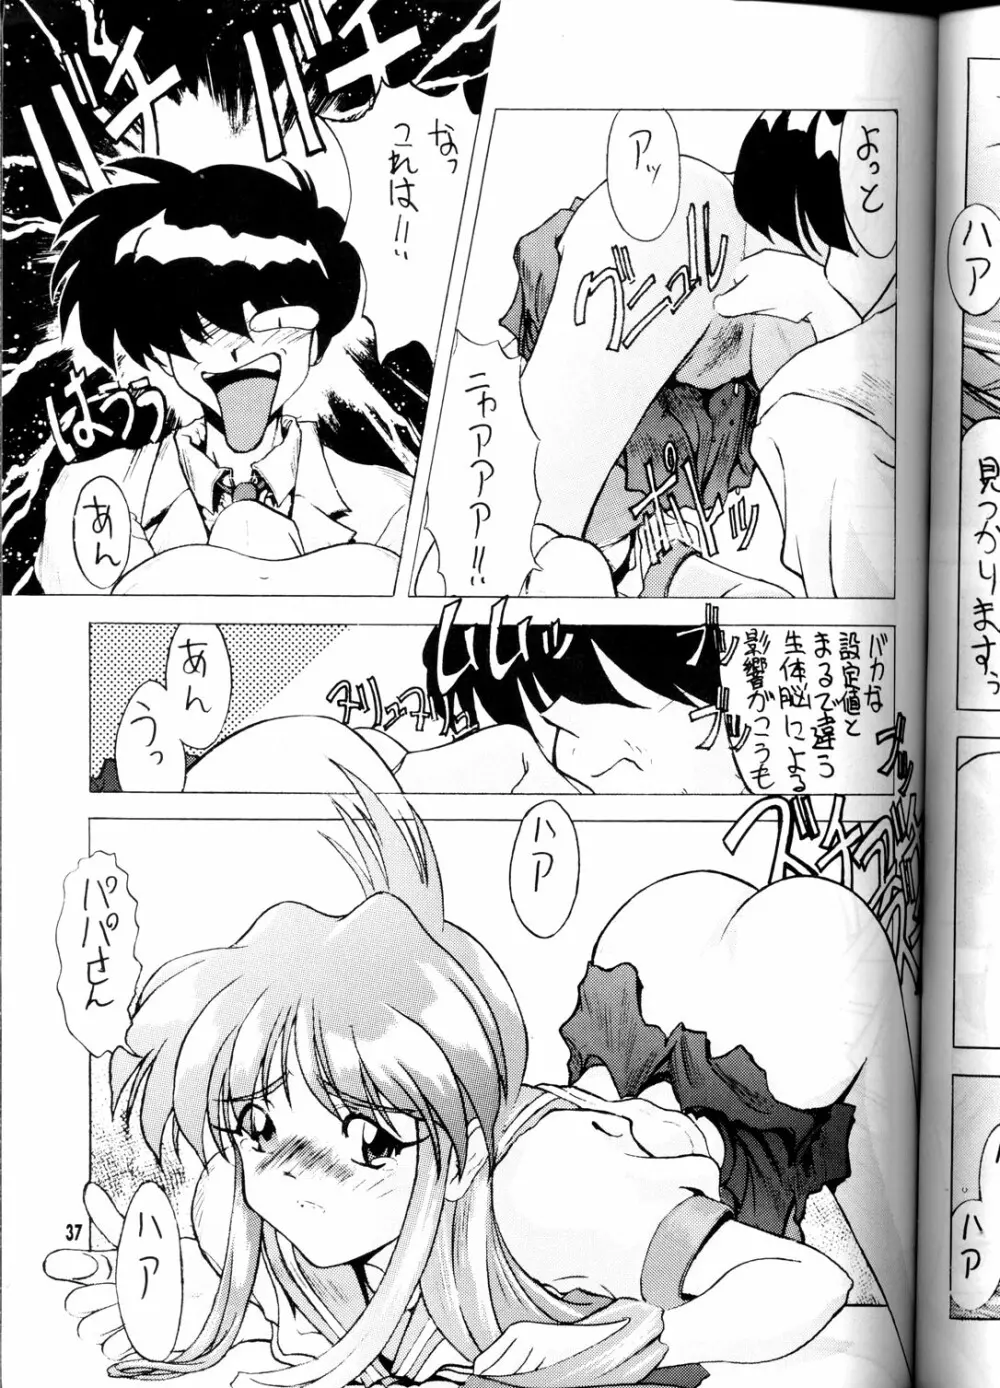 OUTLAW STAR 36ページ